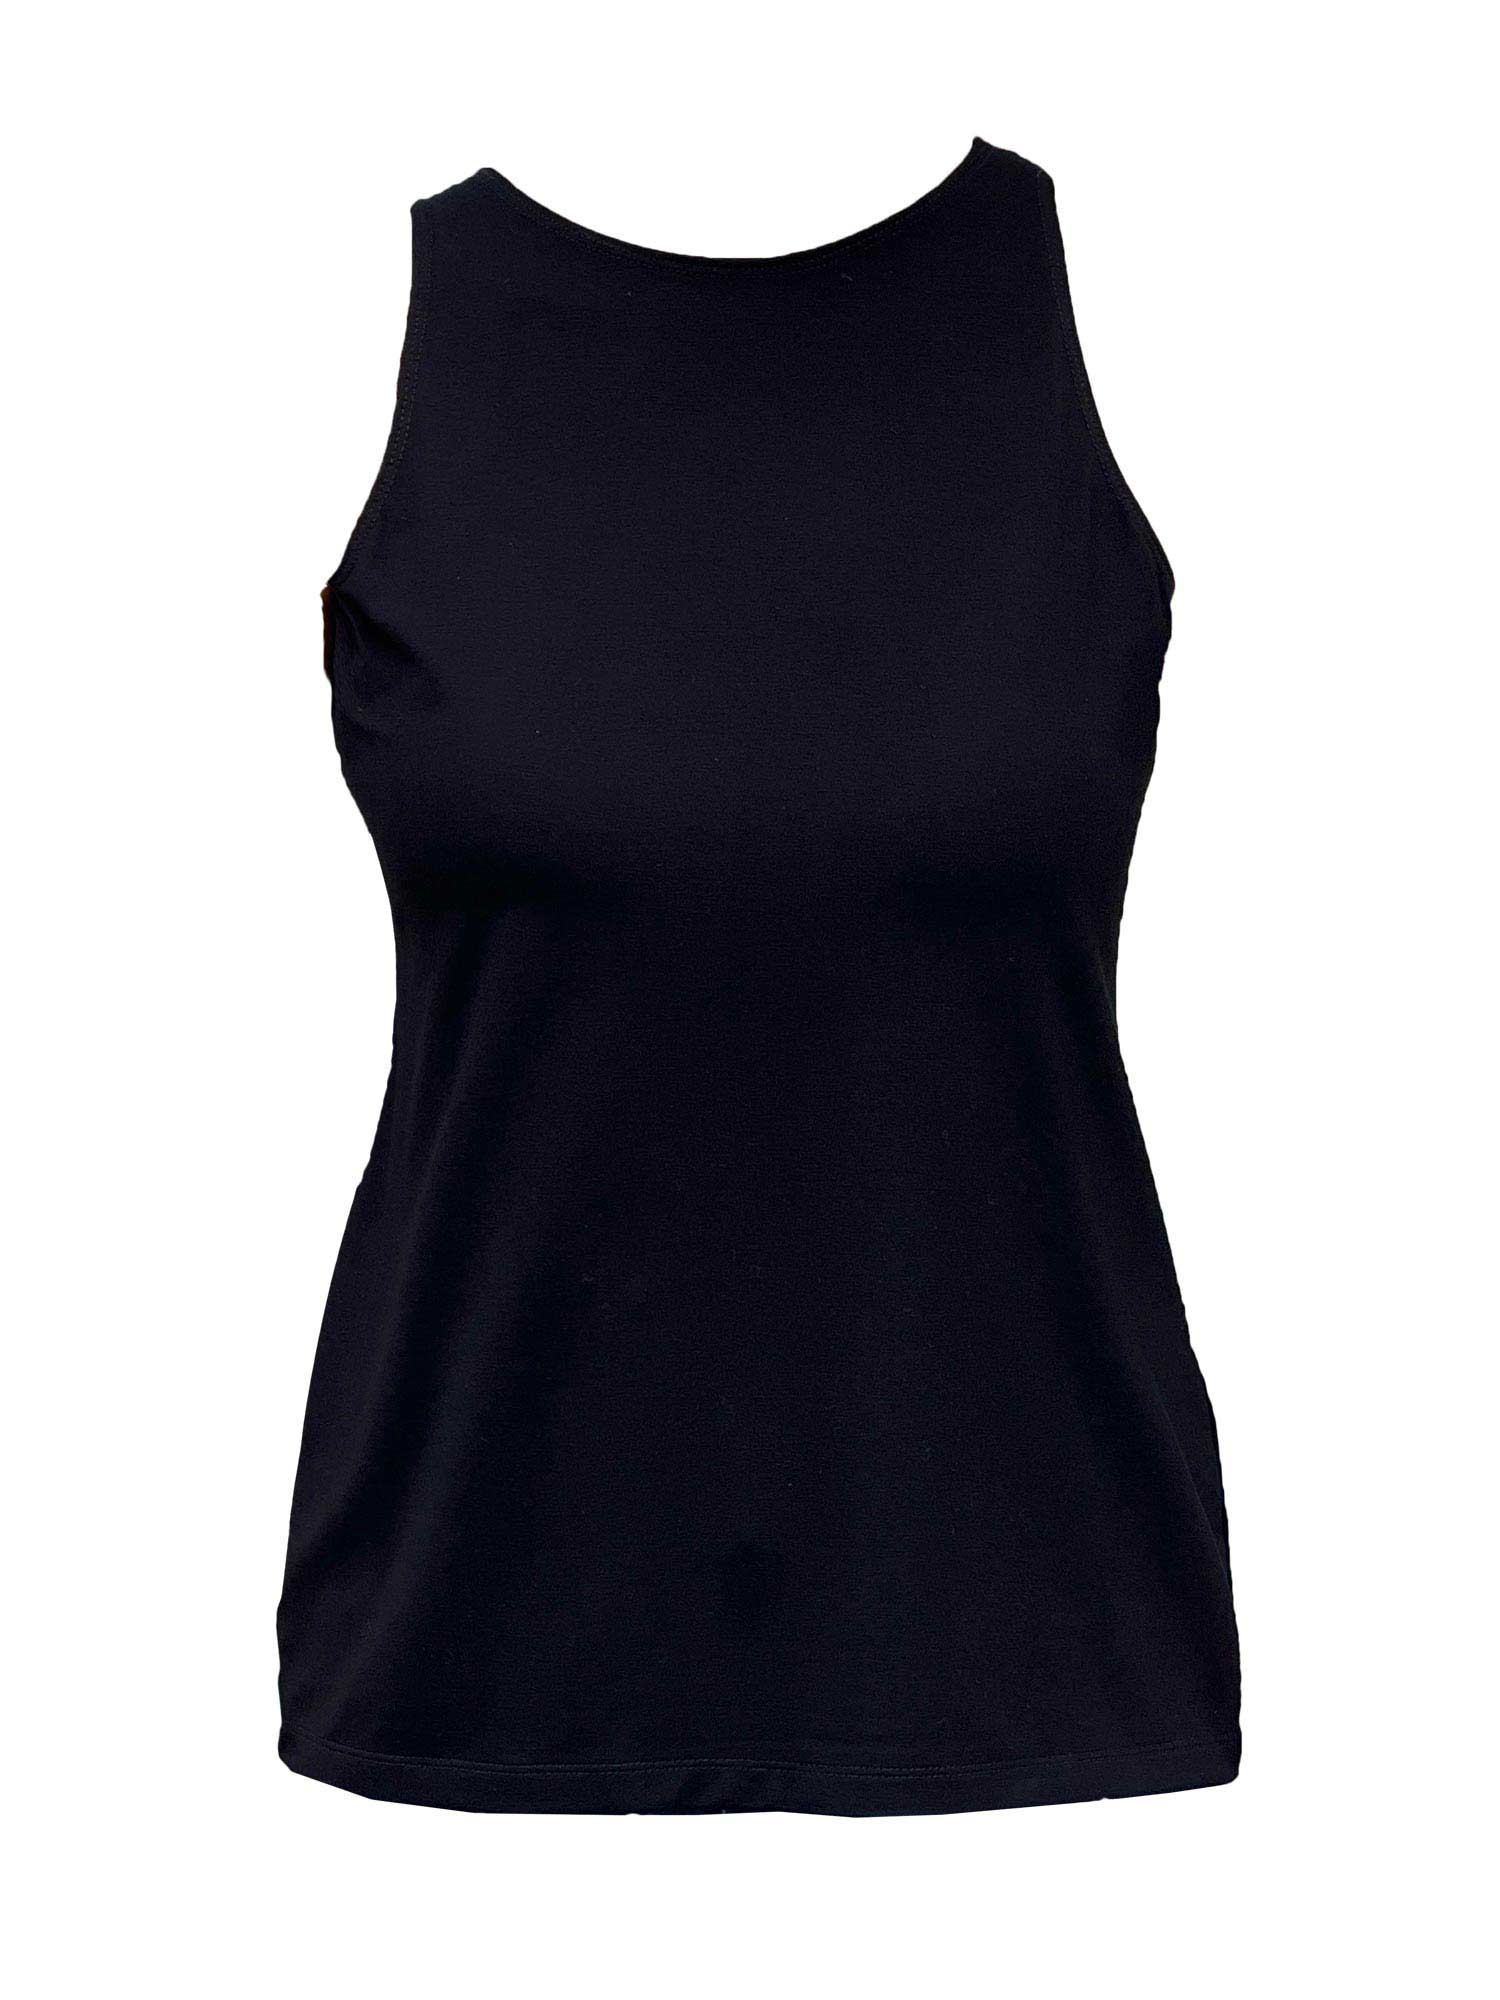 Dolly high neck tank top  Sustainable women's fashion made in